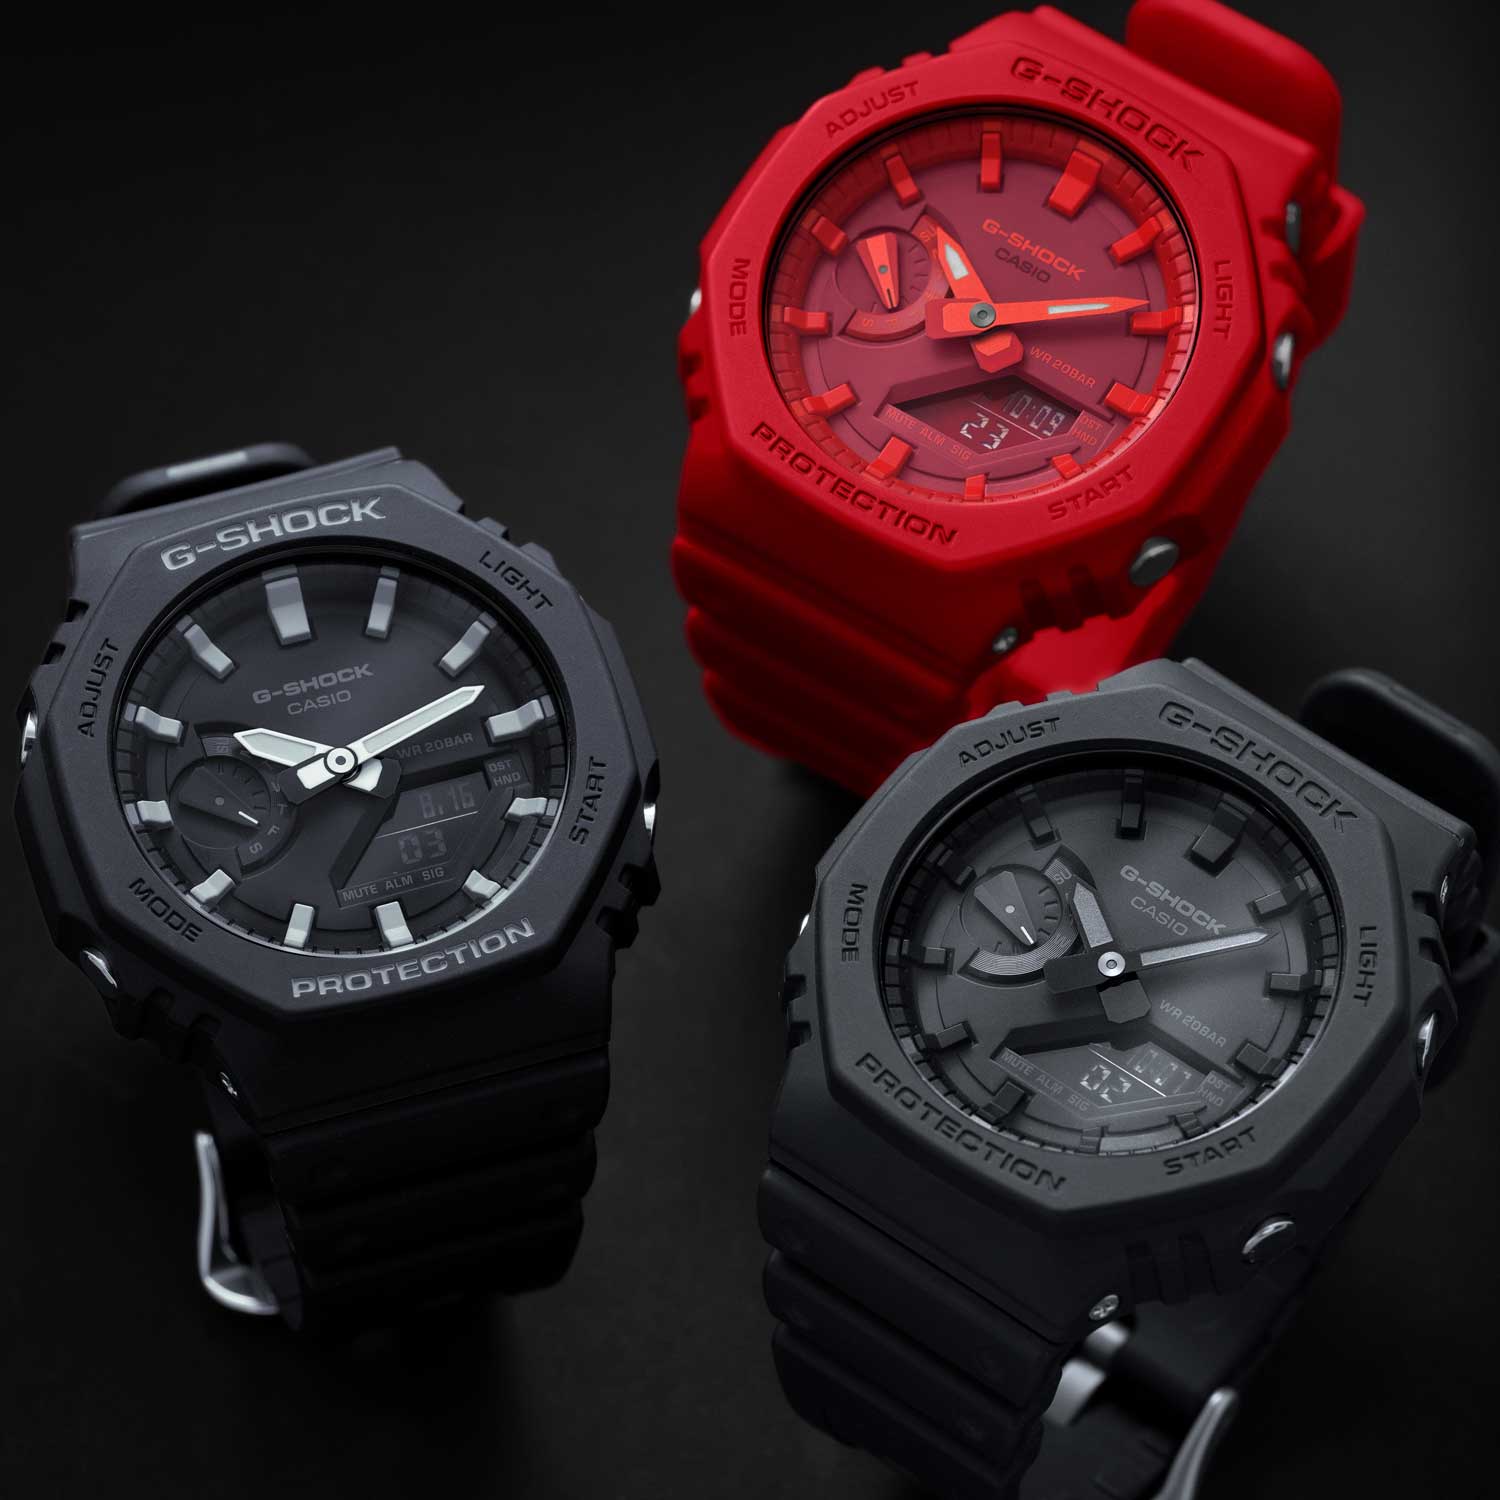 The trio of launch G-SHOCK GA-2100 watches (Image © Revolution)